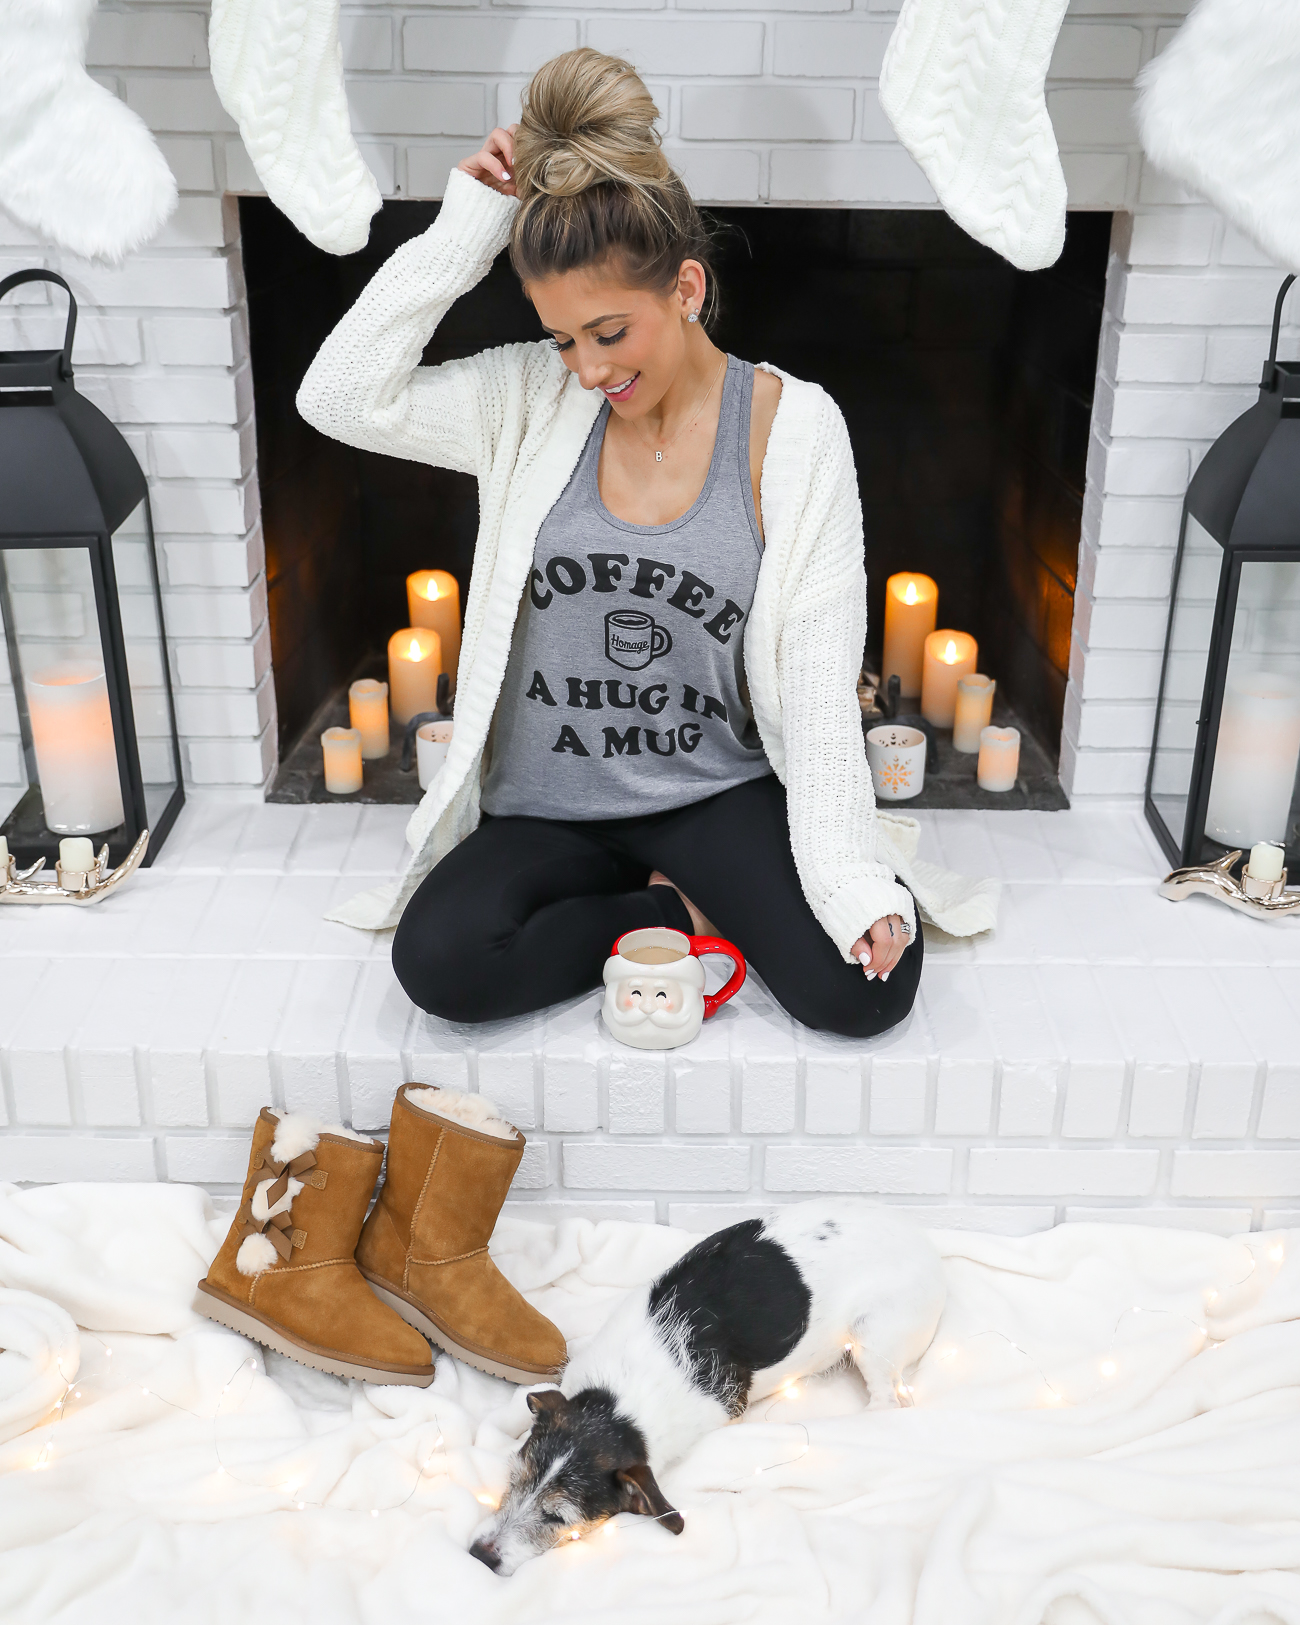 UGGS KOOLABURRA VICTORIA SHORT BOOTS CASUAL WINTER OUTFIT COFFEE TANK TOP WHITE CHENILLE CARDIGAN WHITE FARMHOUSE FIREPLACE LAURA BEVERLIN